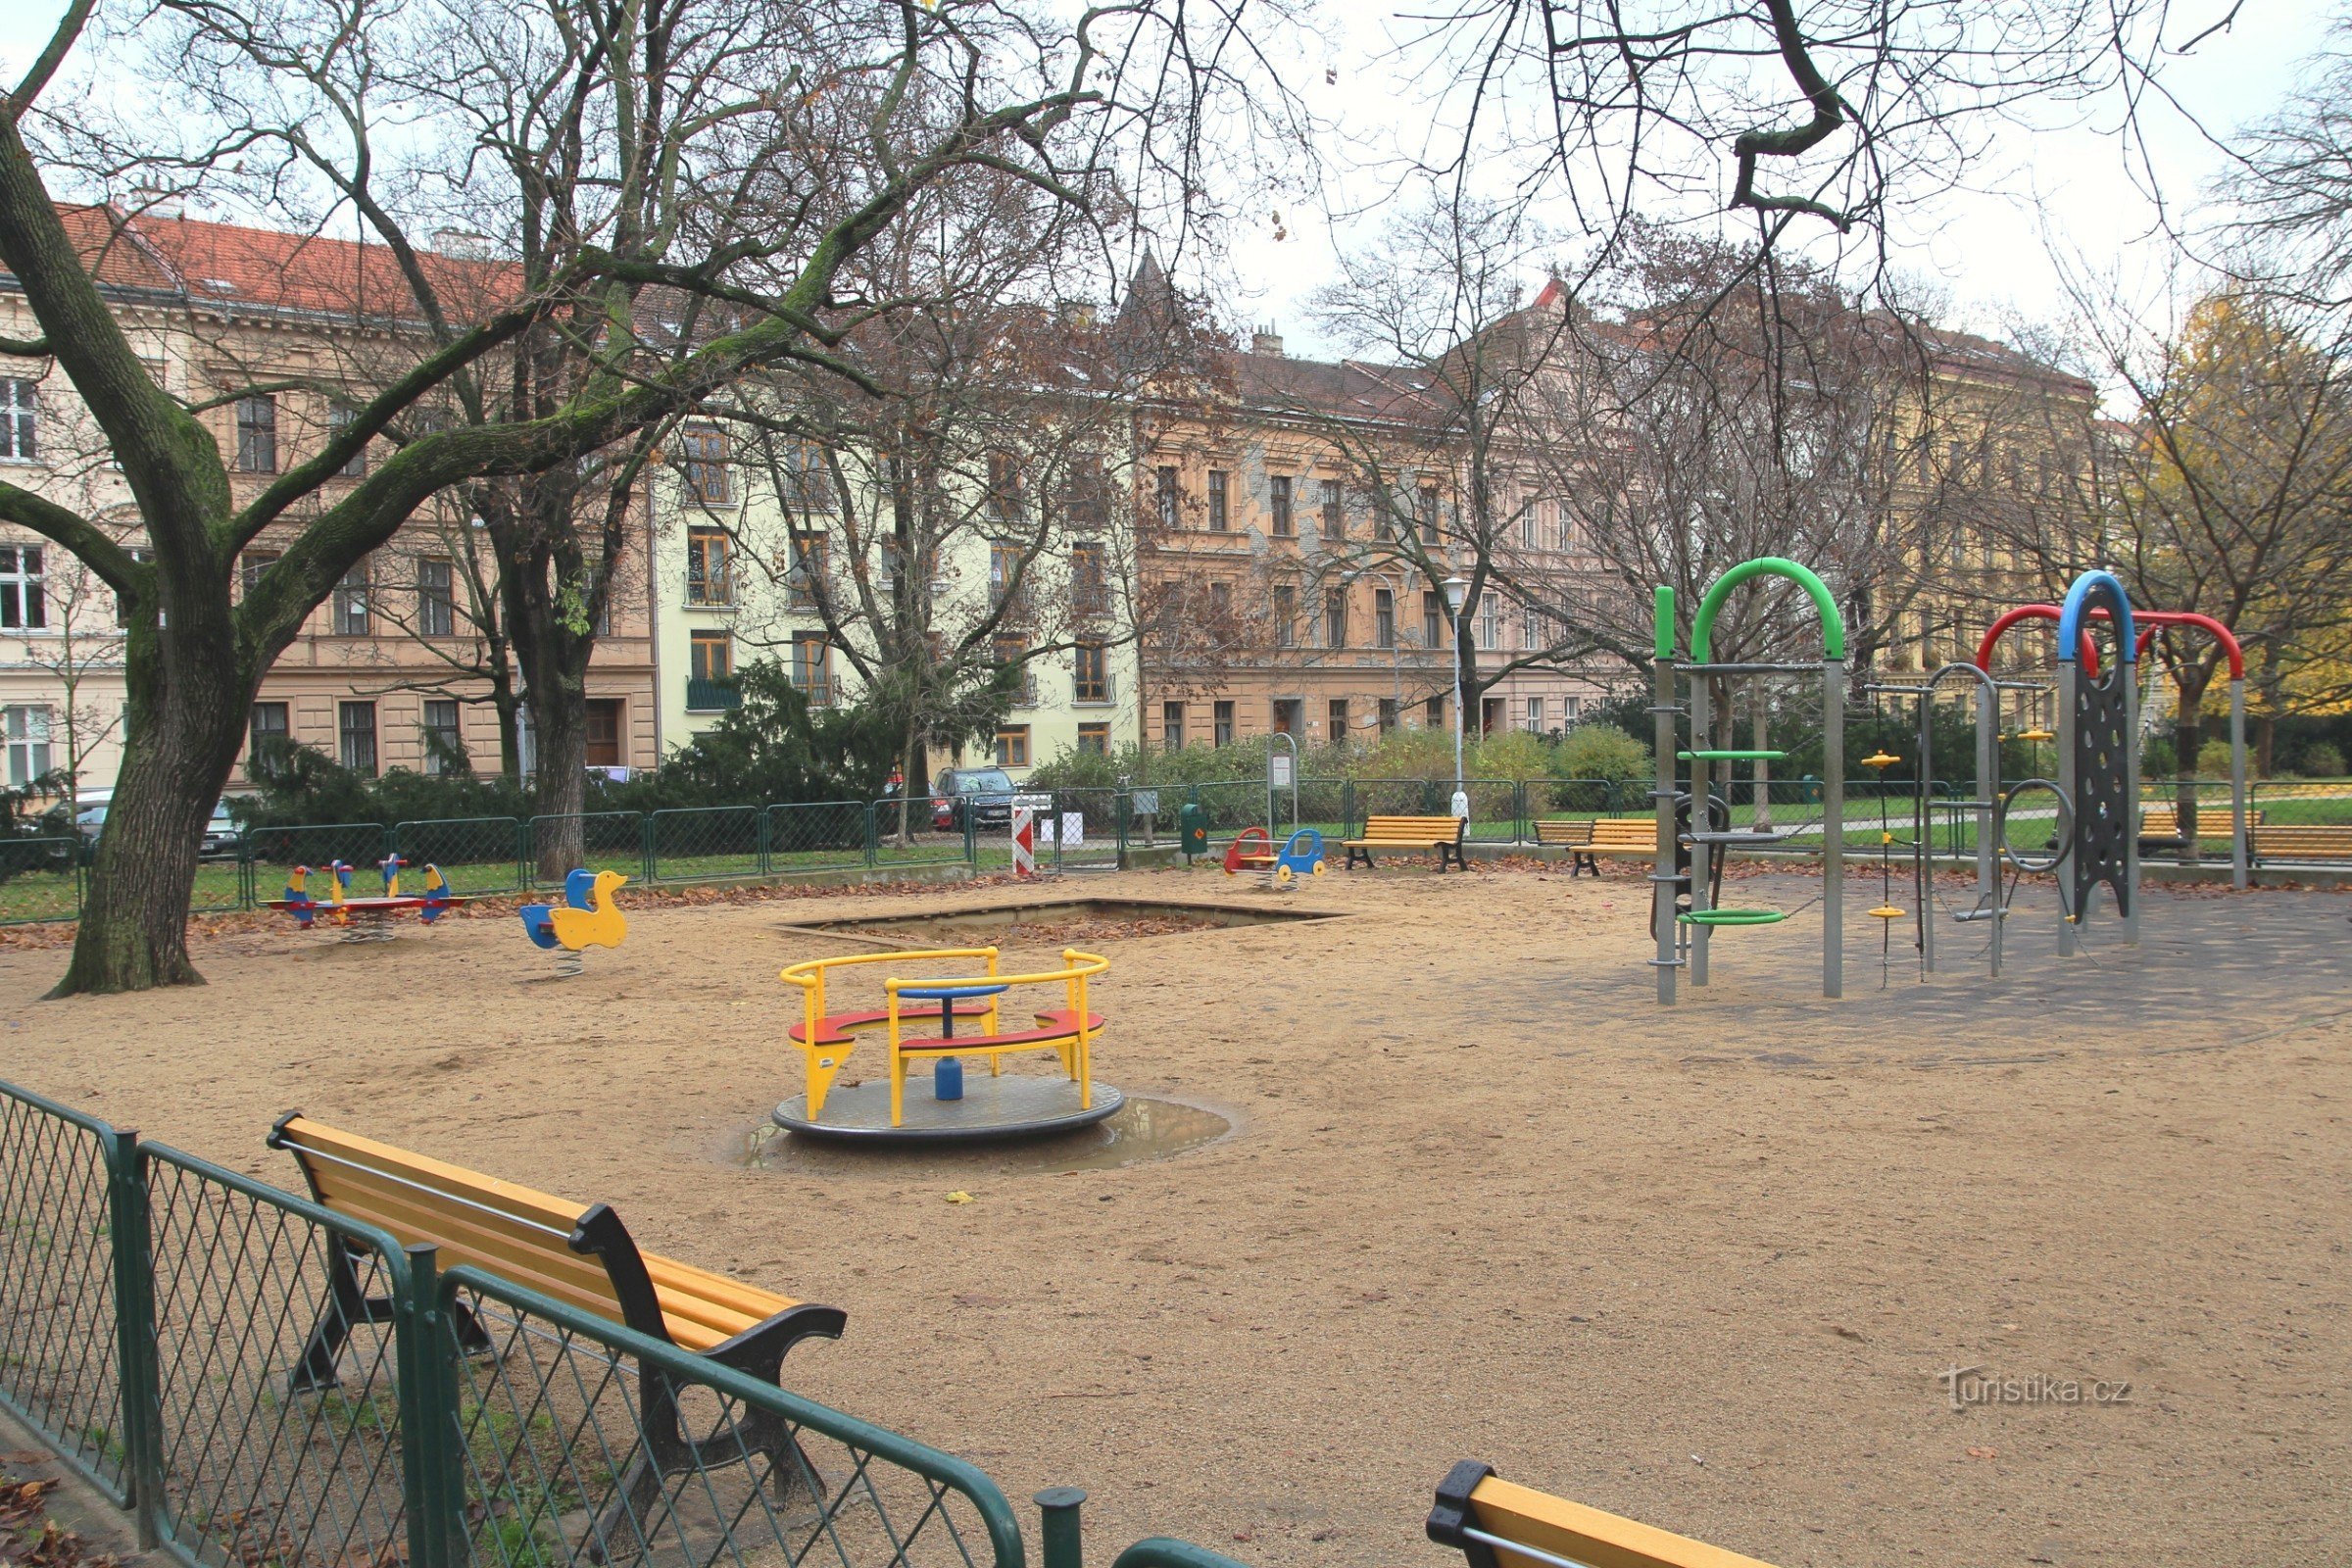 Children's playground in the northern part of the park